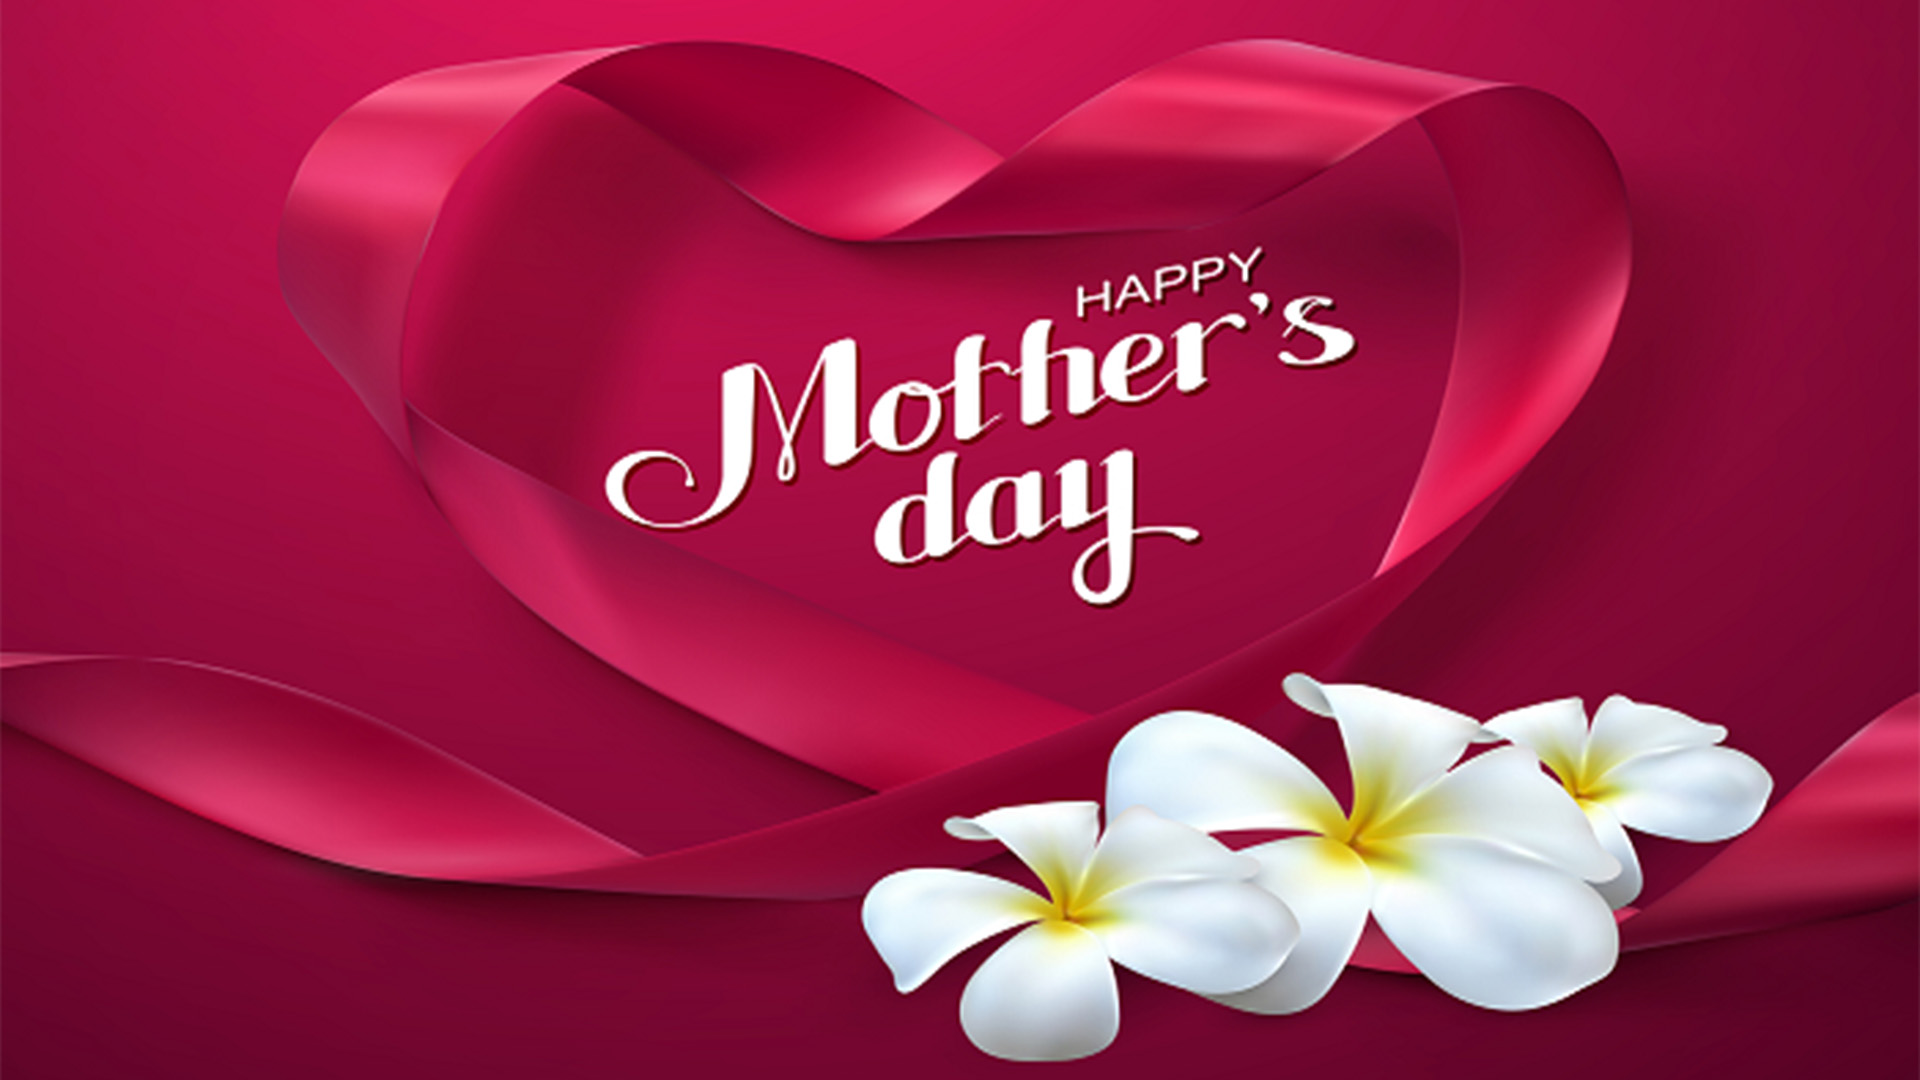 Happy Mothers Day Images Mother's Day Wishes & Greetings